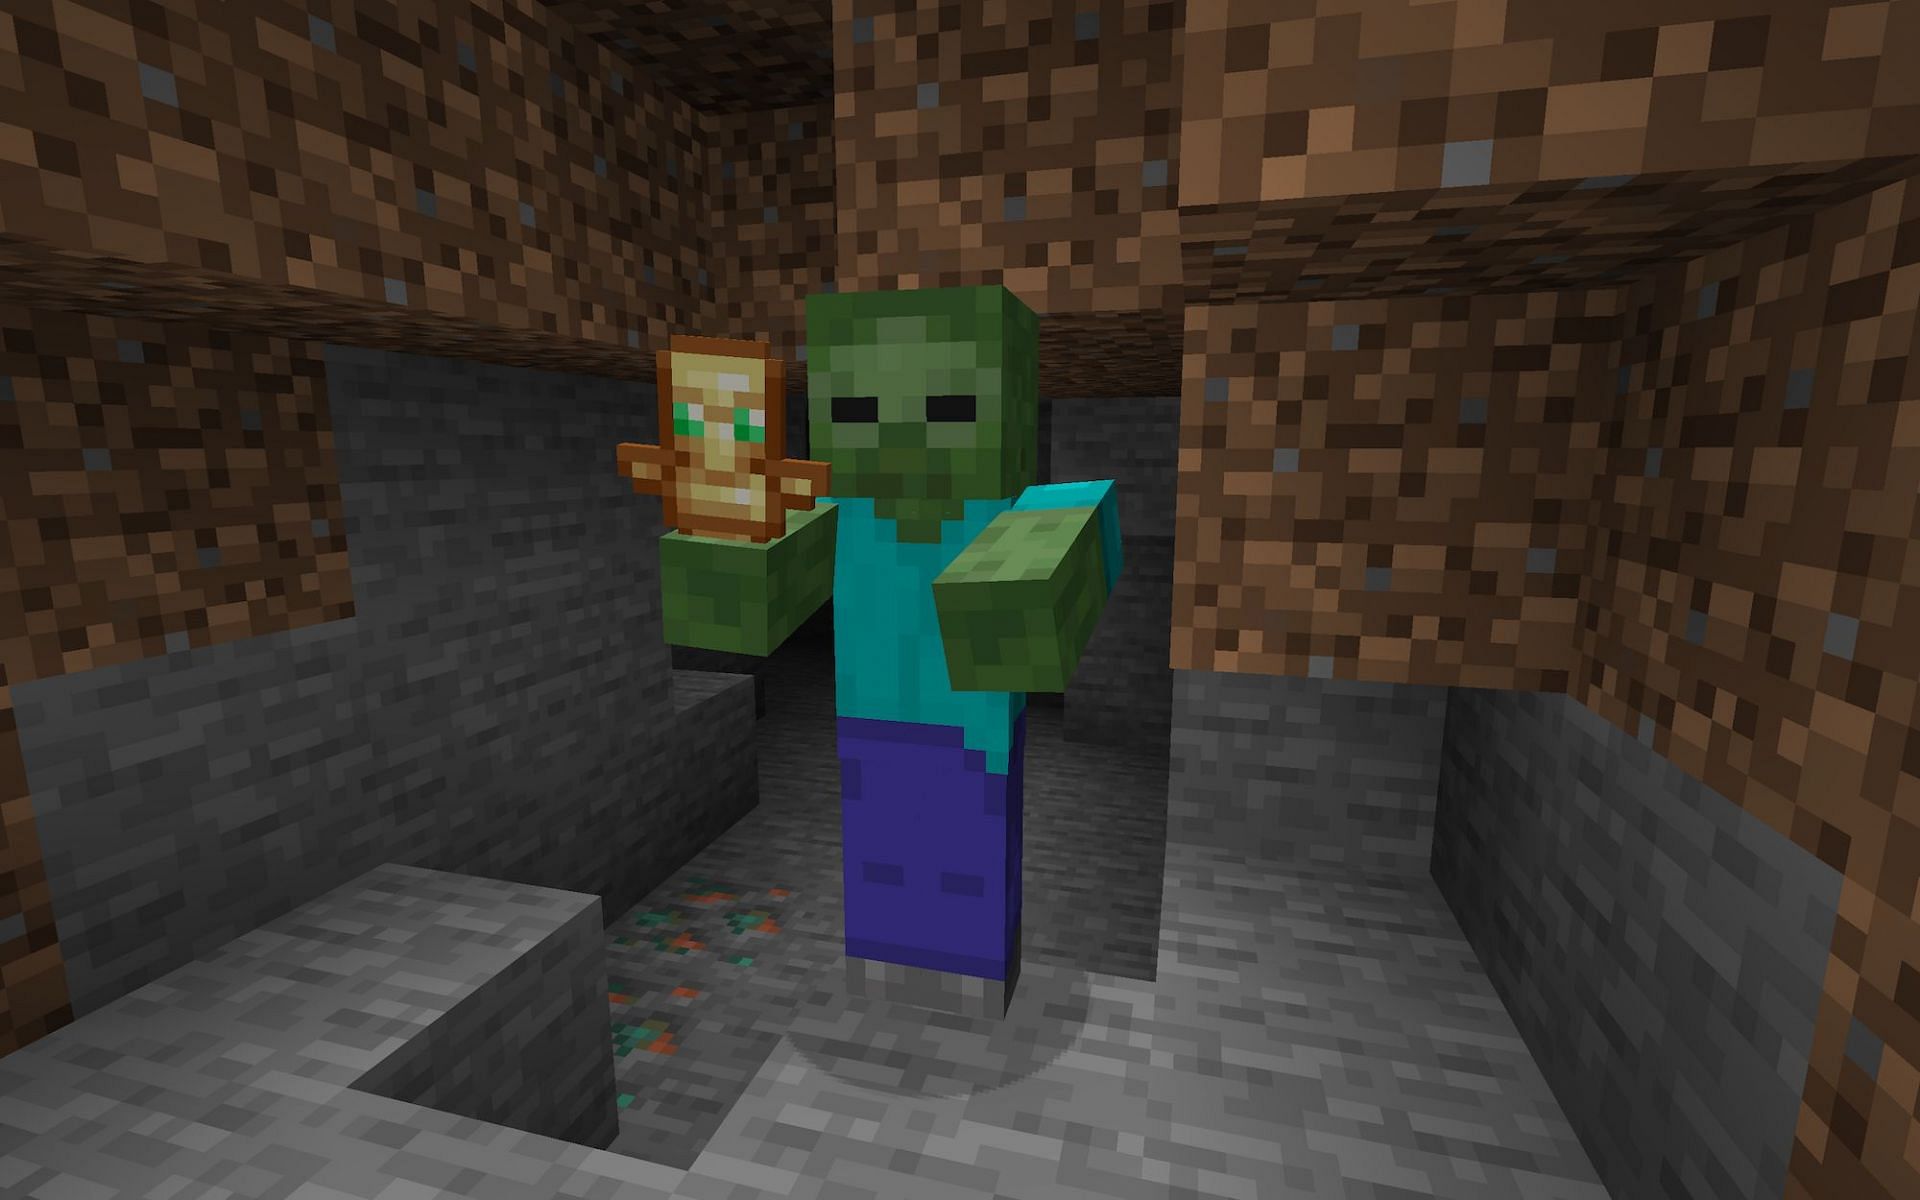 Zombie holding a totem of undying [Image via Mine]